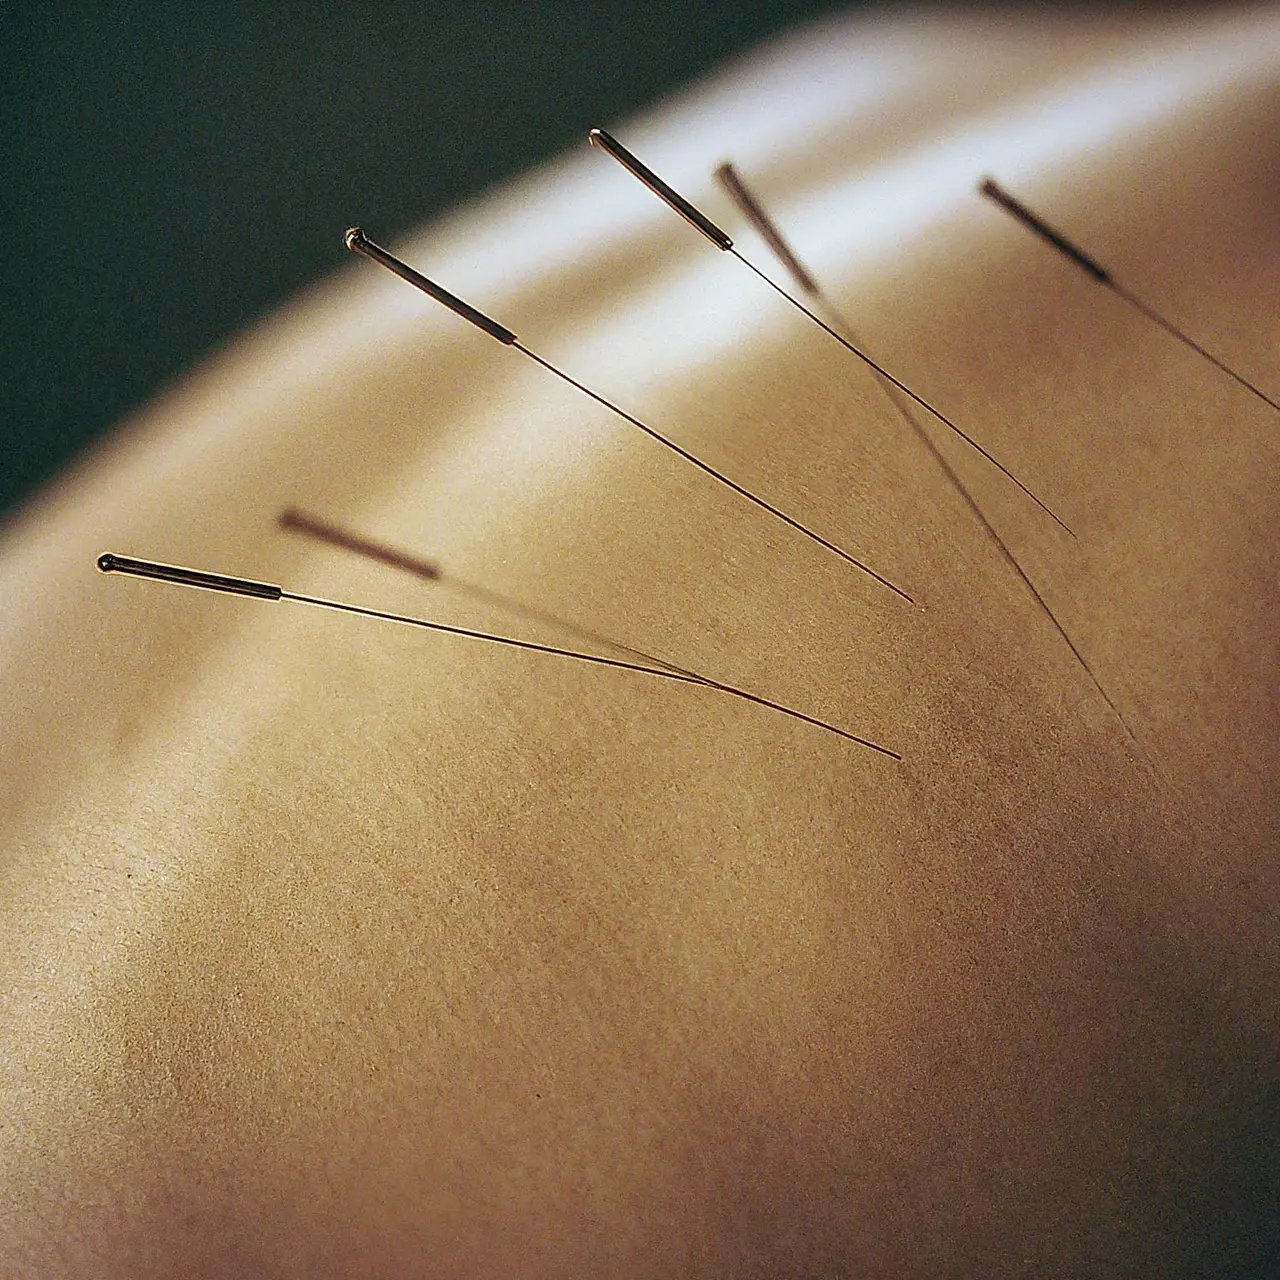 Close-up of acupuncture needles on a human back. 35mm stock photo